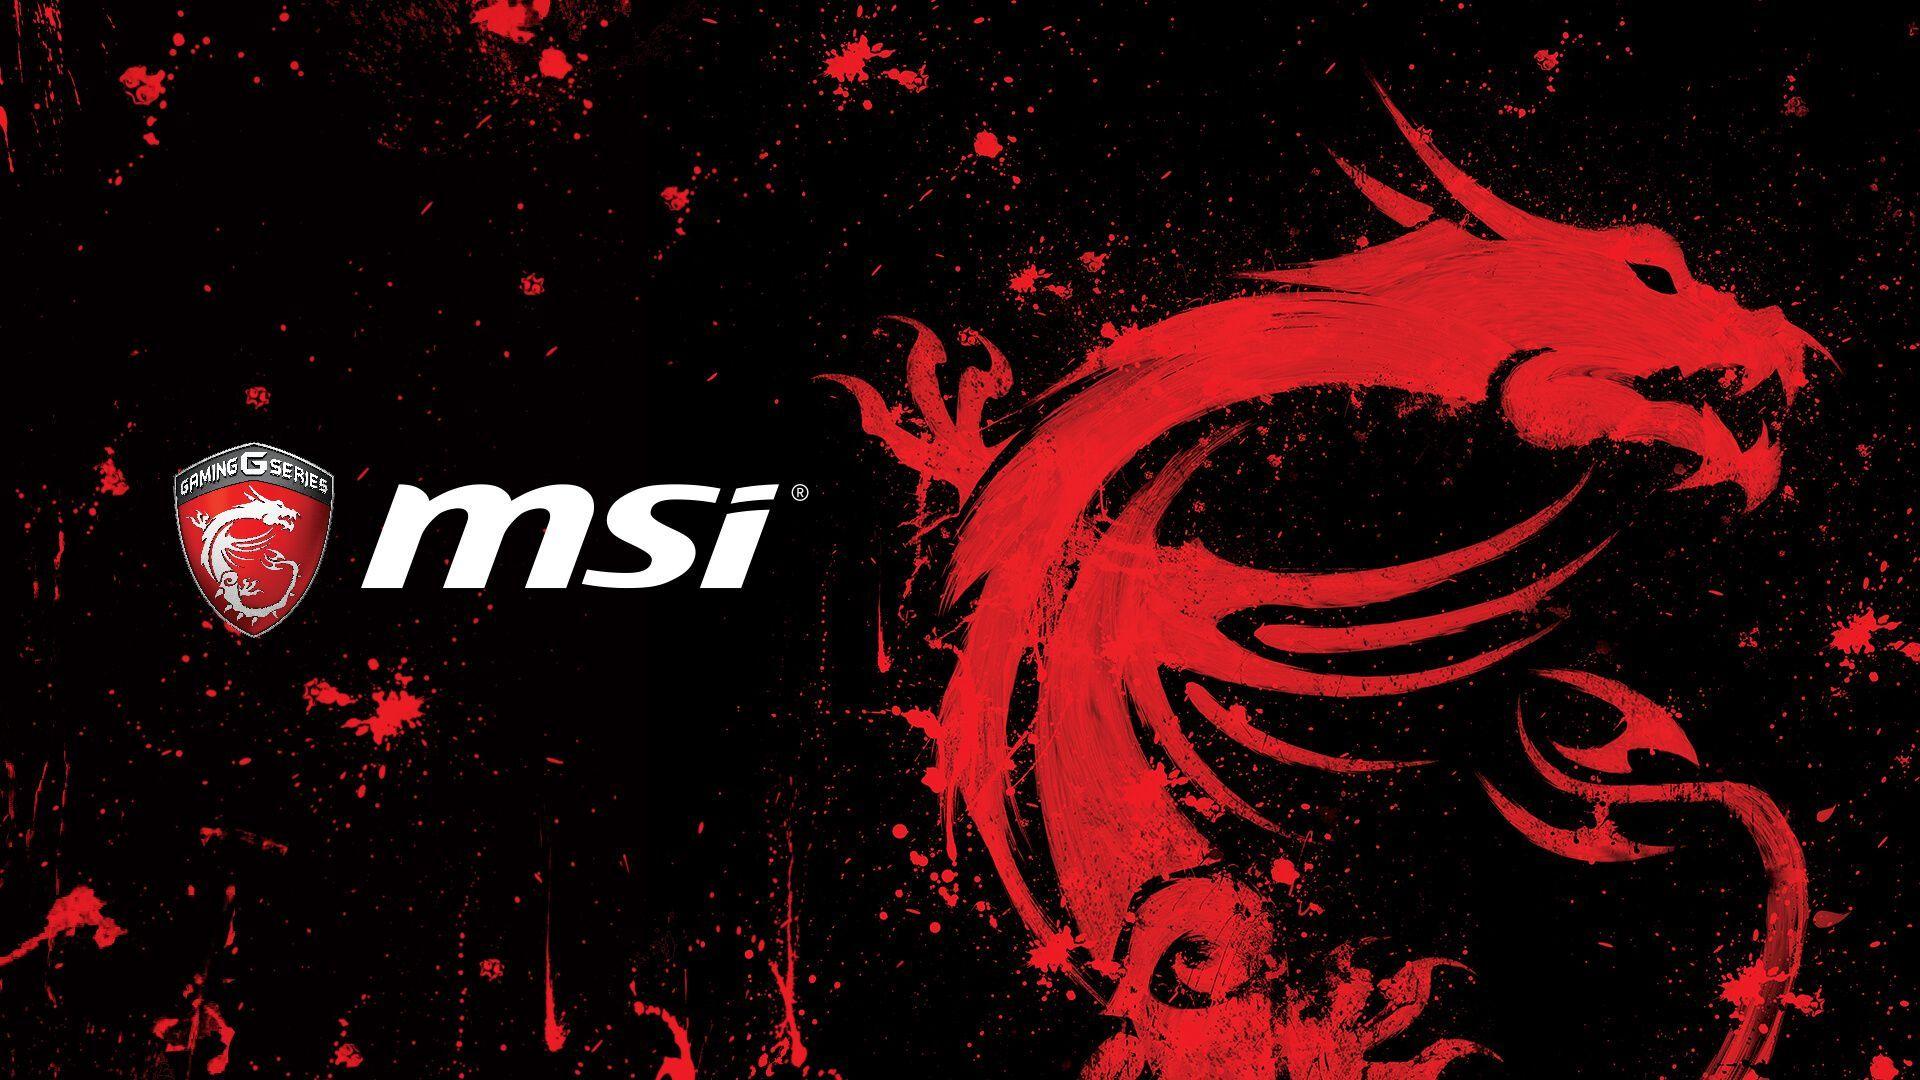 cool 45 MSI Wallpaper for Laptops. MSI Laptops Backgounds Singapore